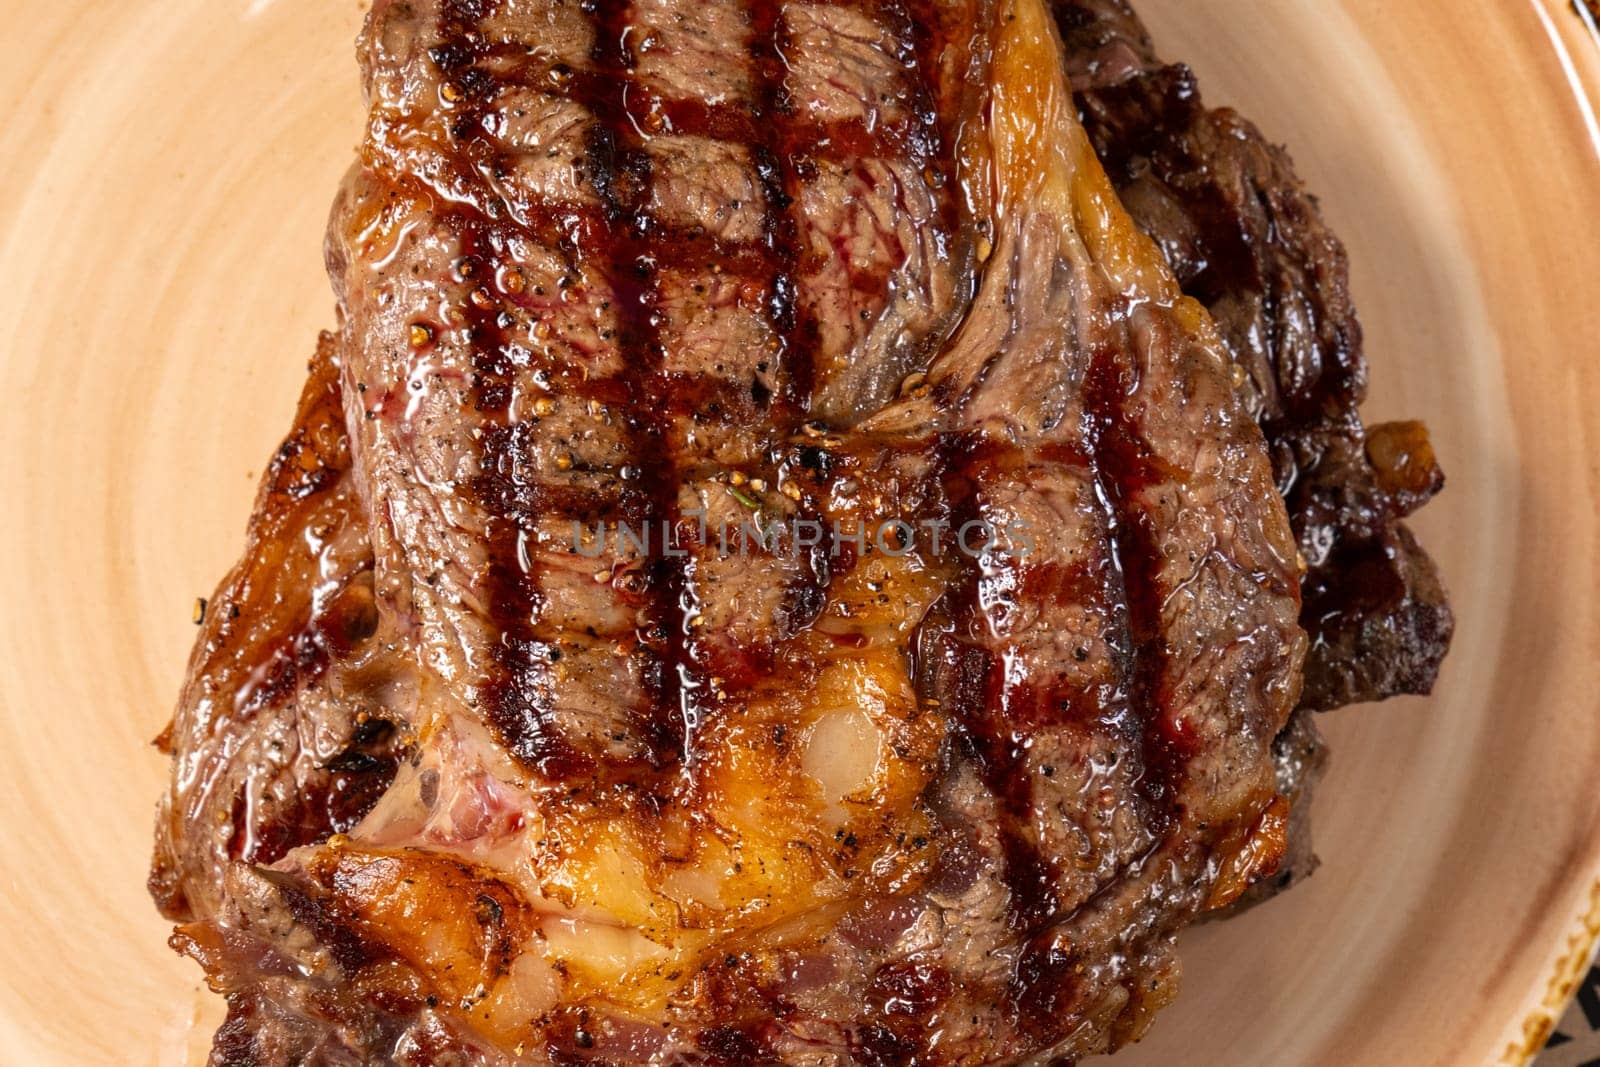 Grilled steak presented on plate, highlighting the rich caramelization and irresistible char marks.